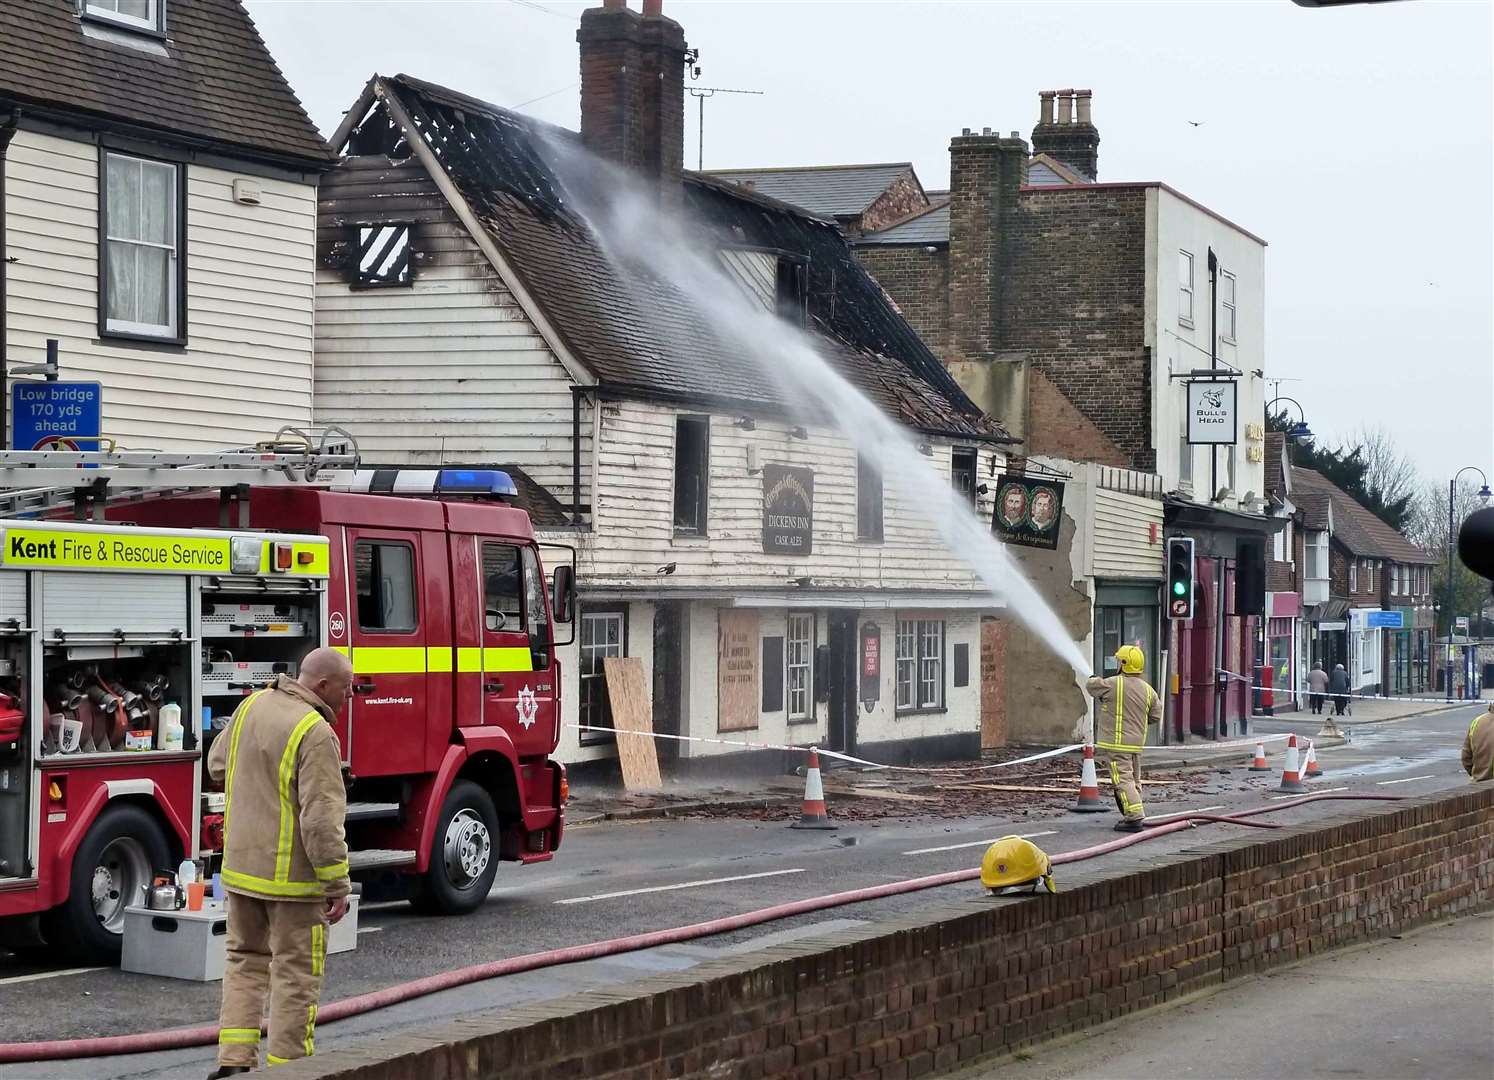 Firefighters putting out the blaze at the Crispin & Crispianus Picture: William Shuter